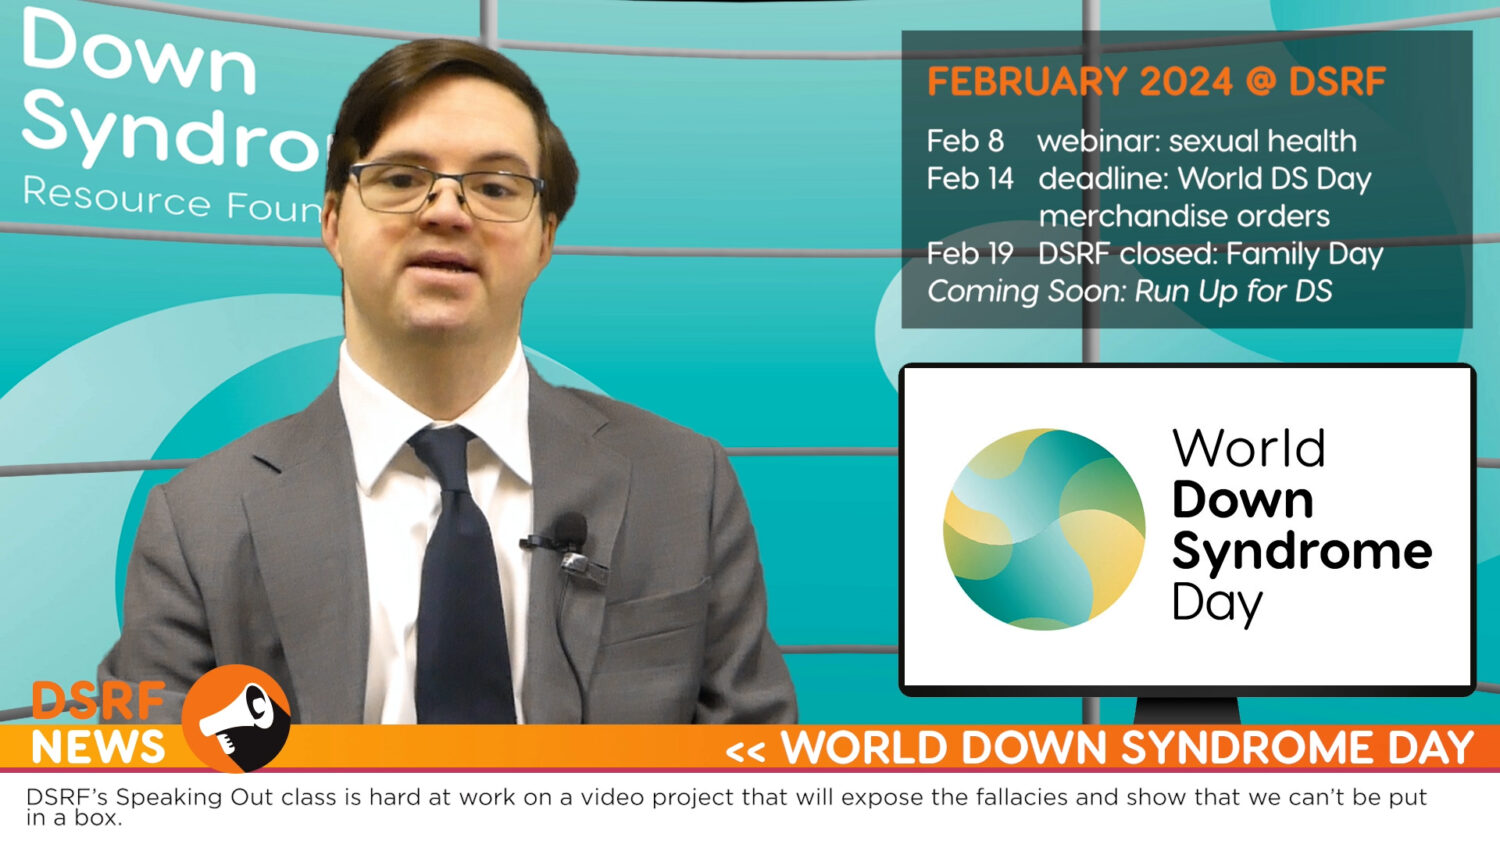 white man with Down syndrome, with brown hair, glasses, and grey suit delivers newscast from virtual news studio